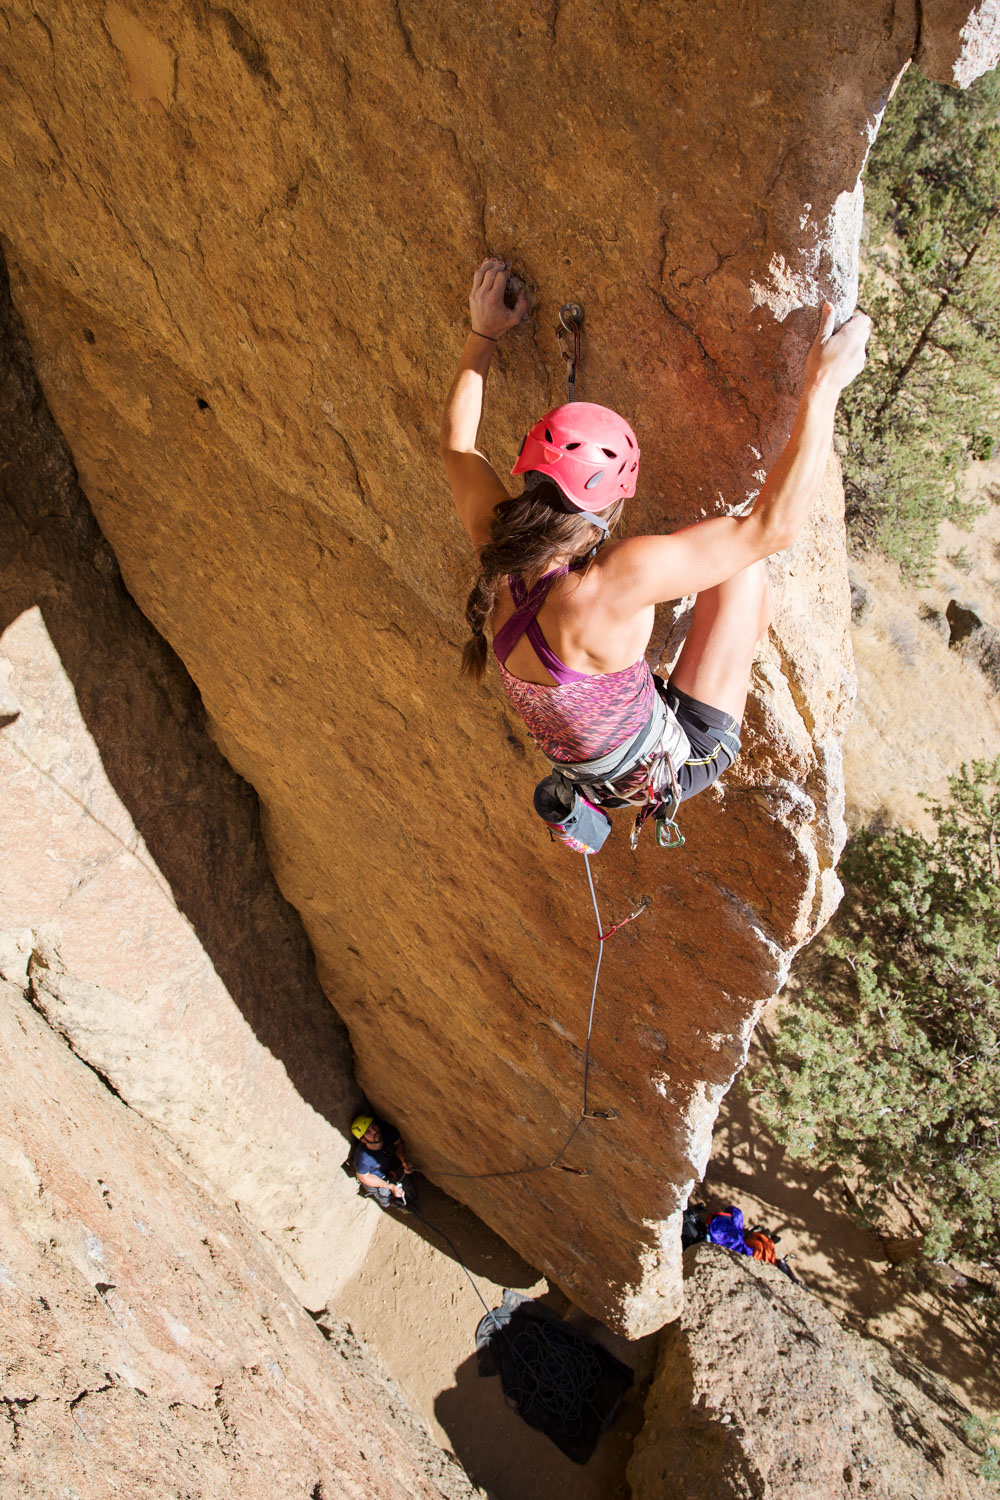  Lisa Chulich high on the wall. Smith Rock, OR 